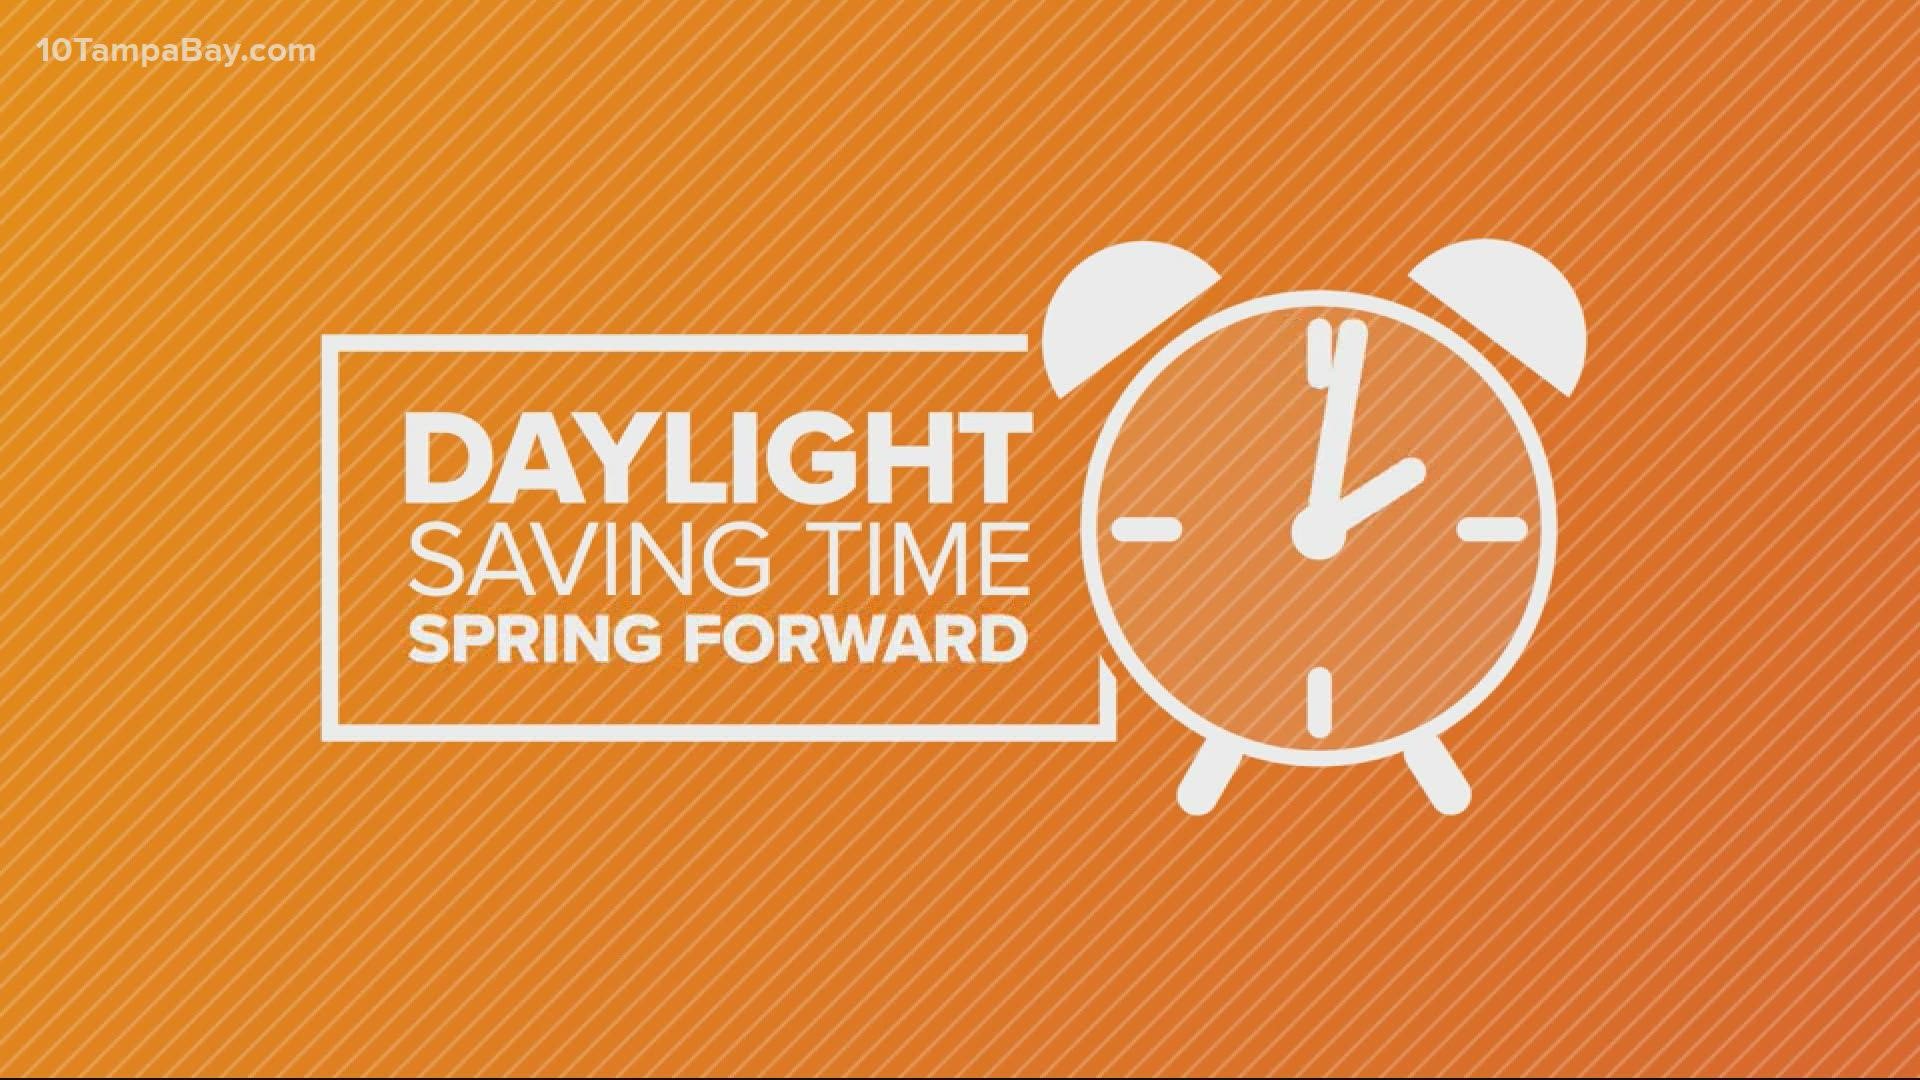 Make sure to set your clock an hour ahead Saturday night...and prepare some extra coffee because you'll be losing an hour of sleep.